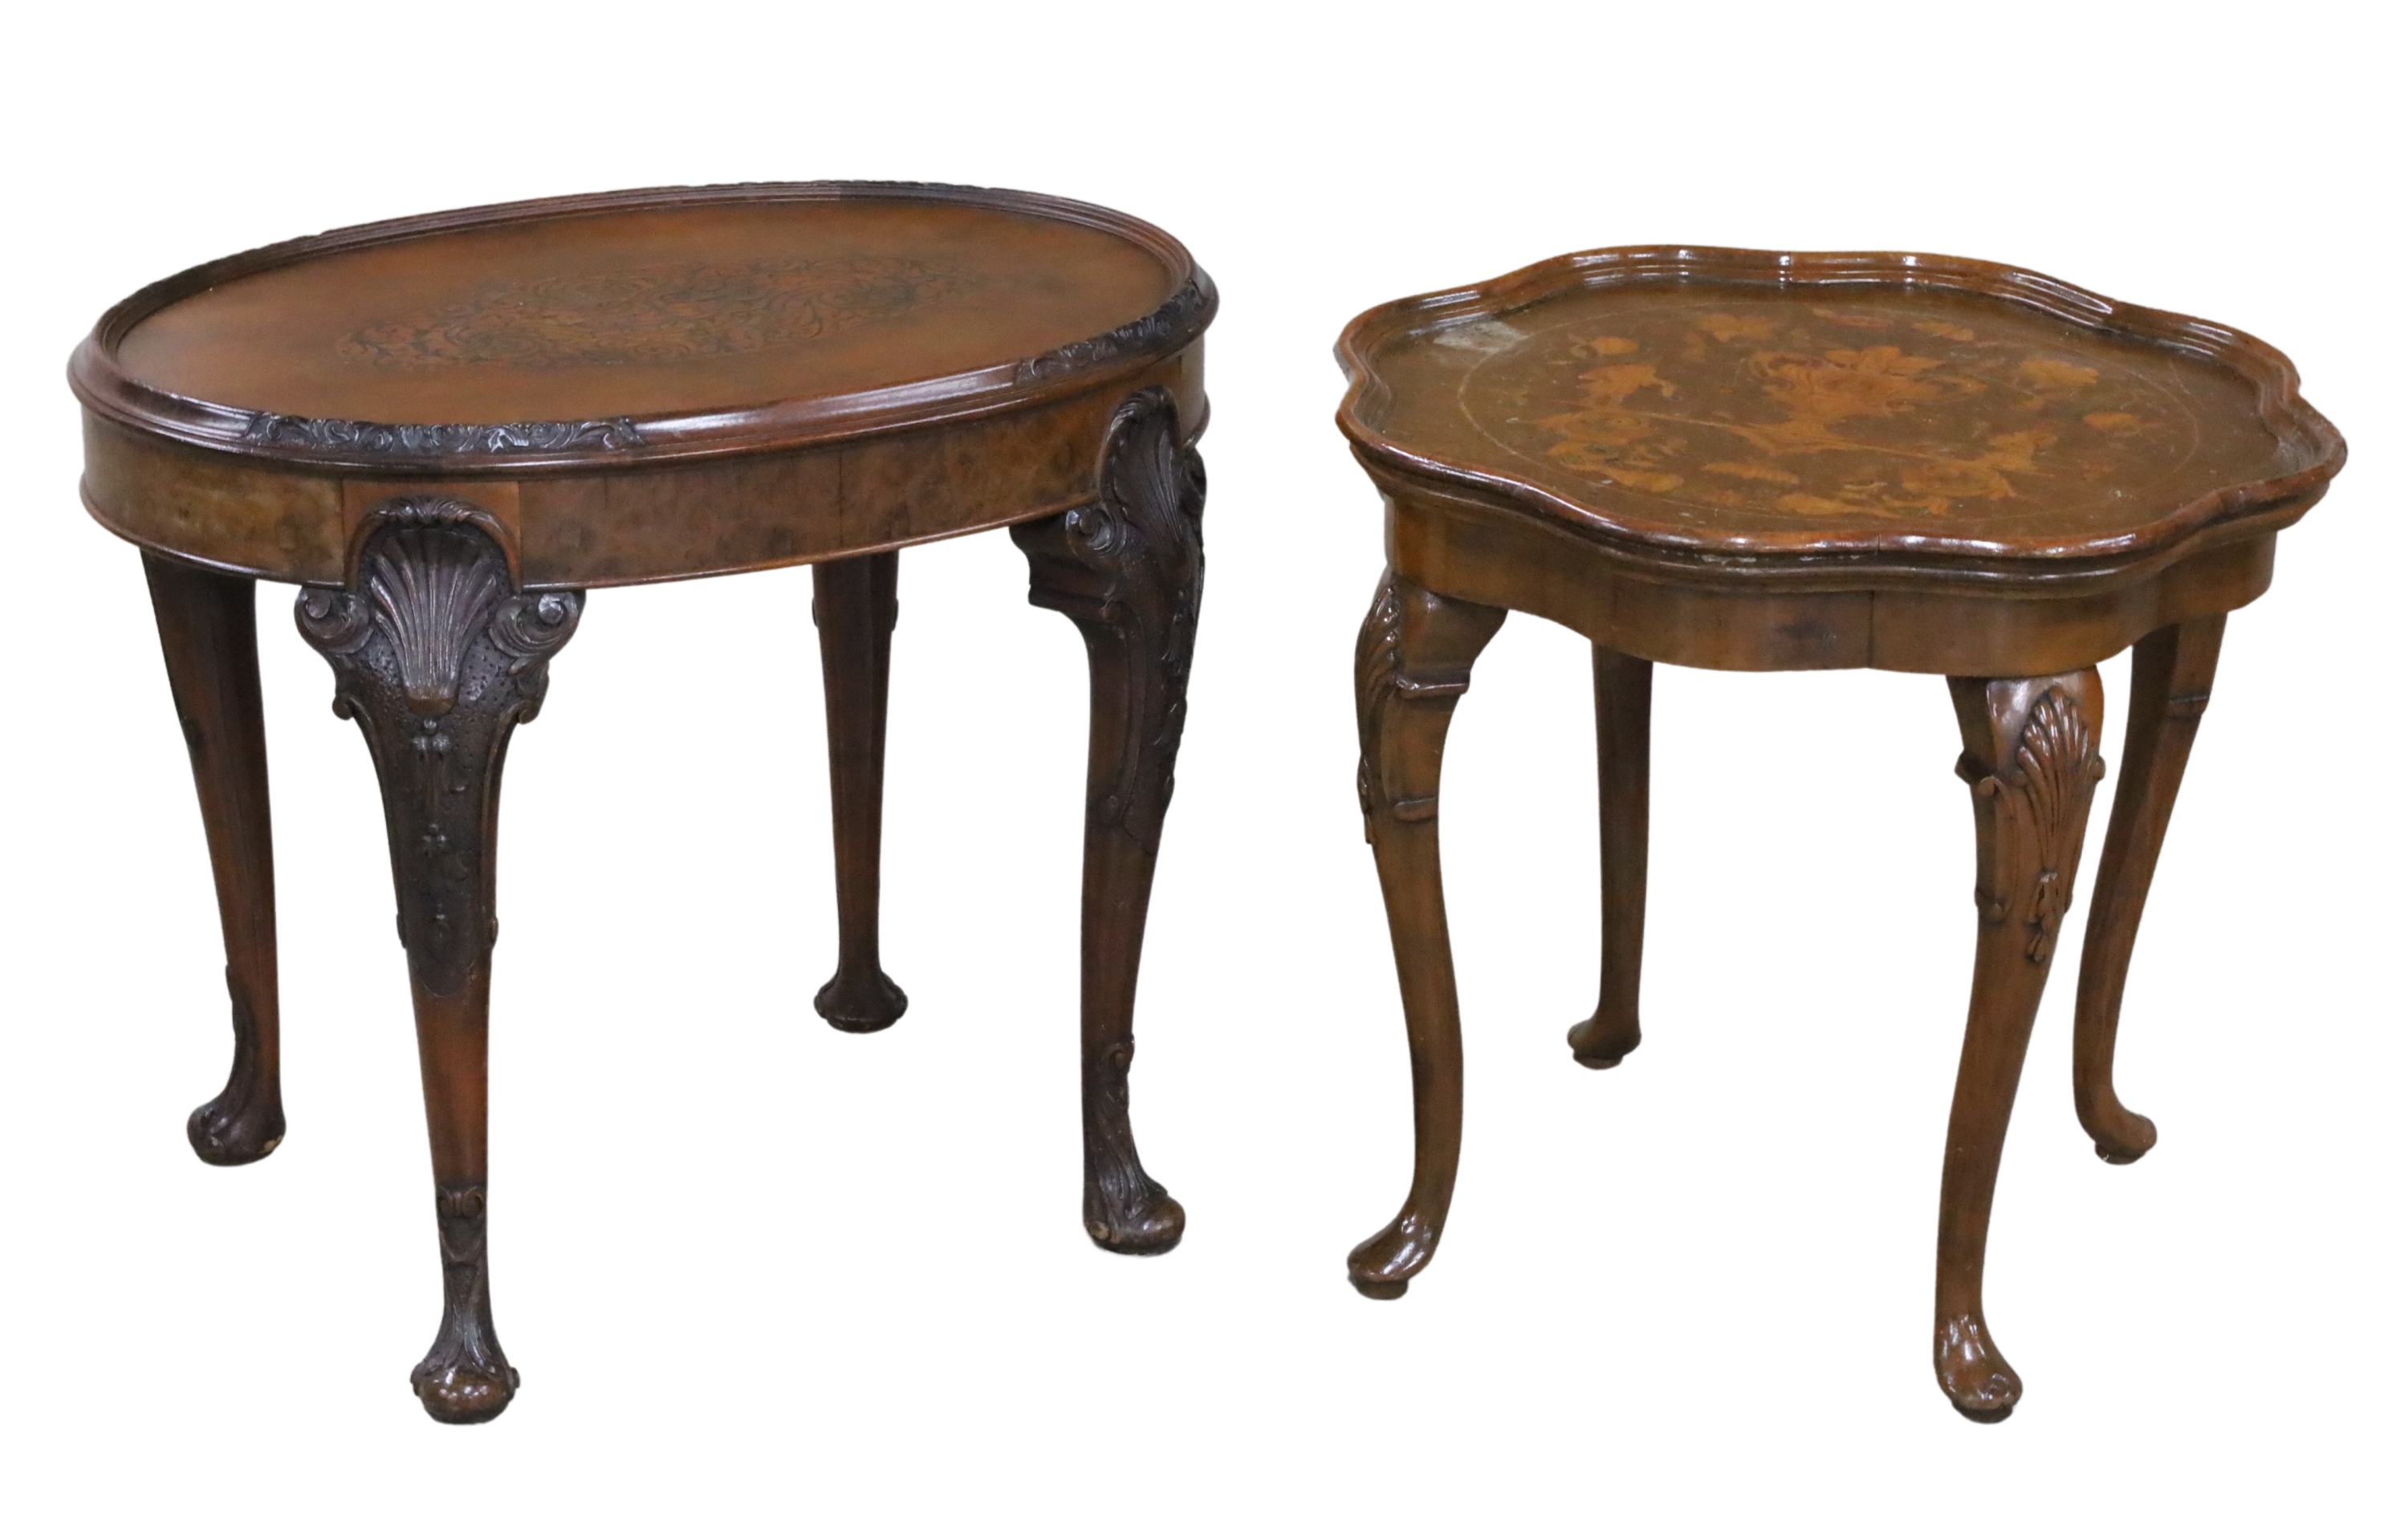 GROUP OF 2 QUEEN ANNE STYLE TABLES 3b3c5e